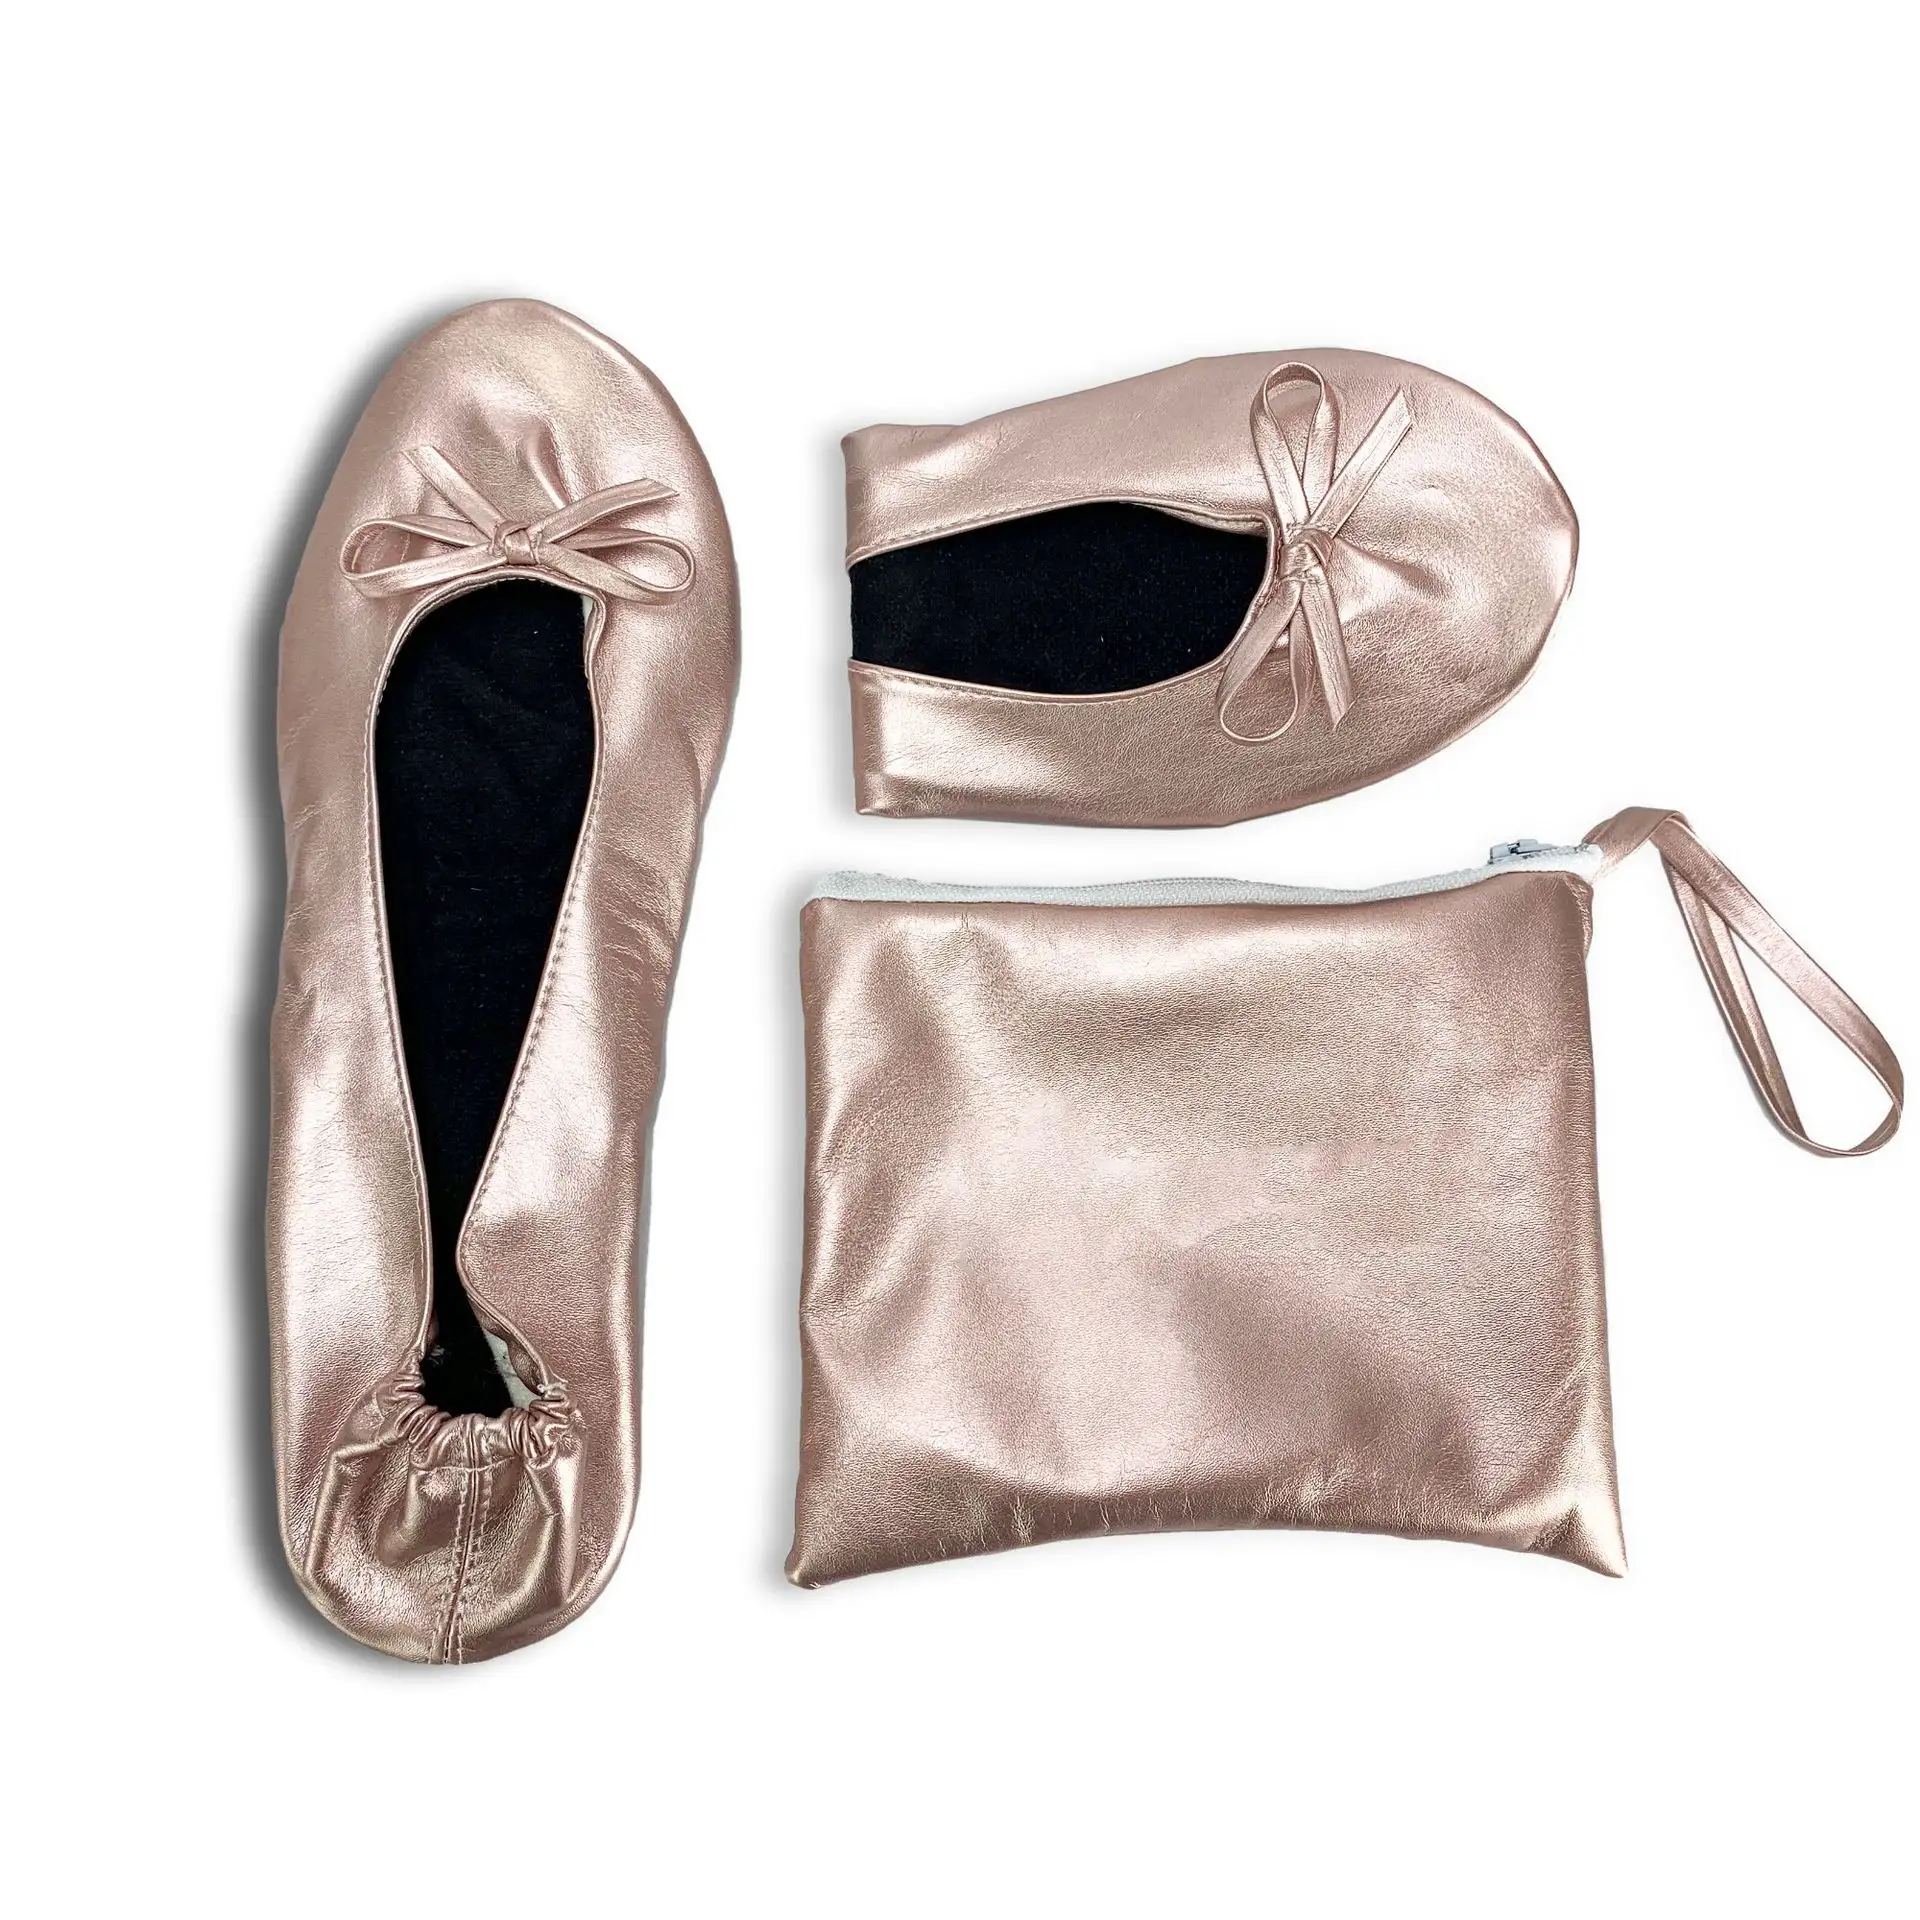 Roll Up Satin Shoes Foldable Pumps Flats Ballet Dance Ladies After Party Shoes with Foldable Bag 